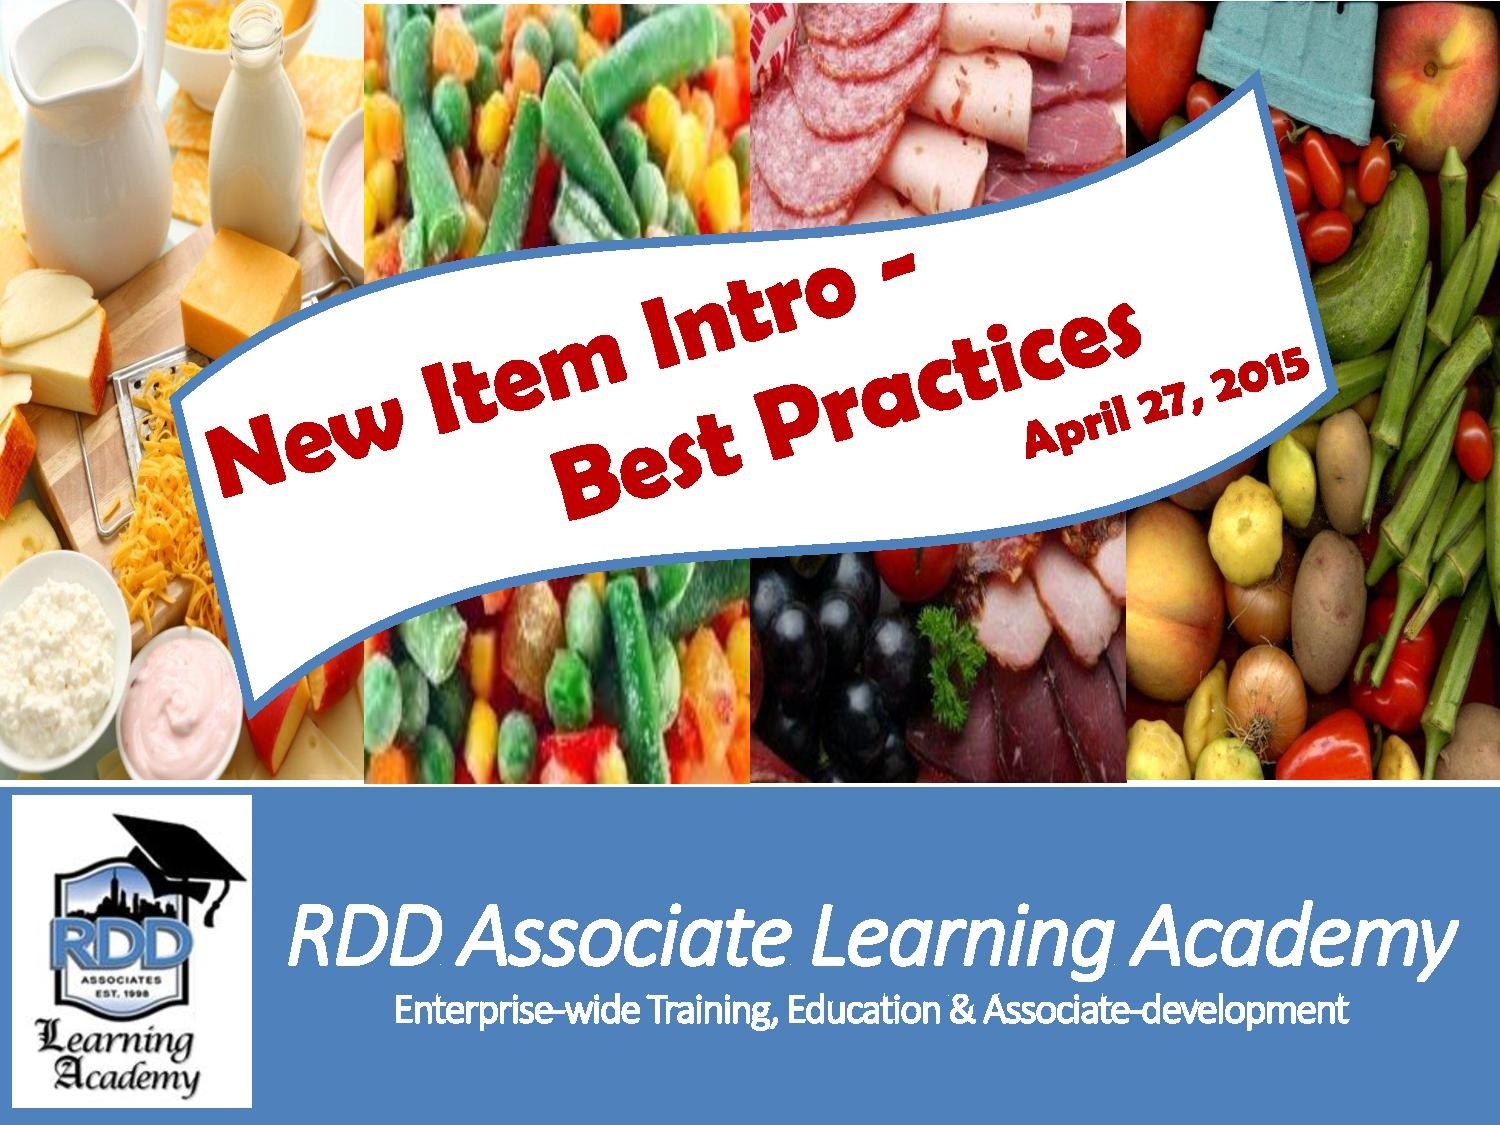 RDD Learning Acad_New Item - Best Practices-page-001